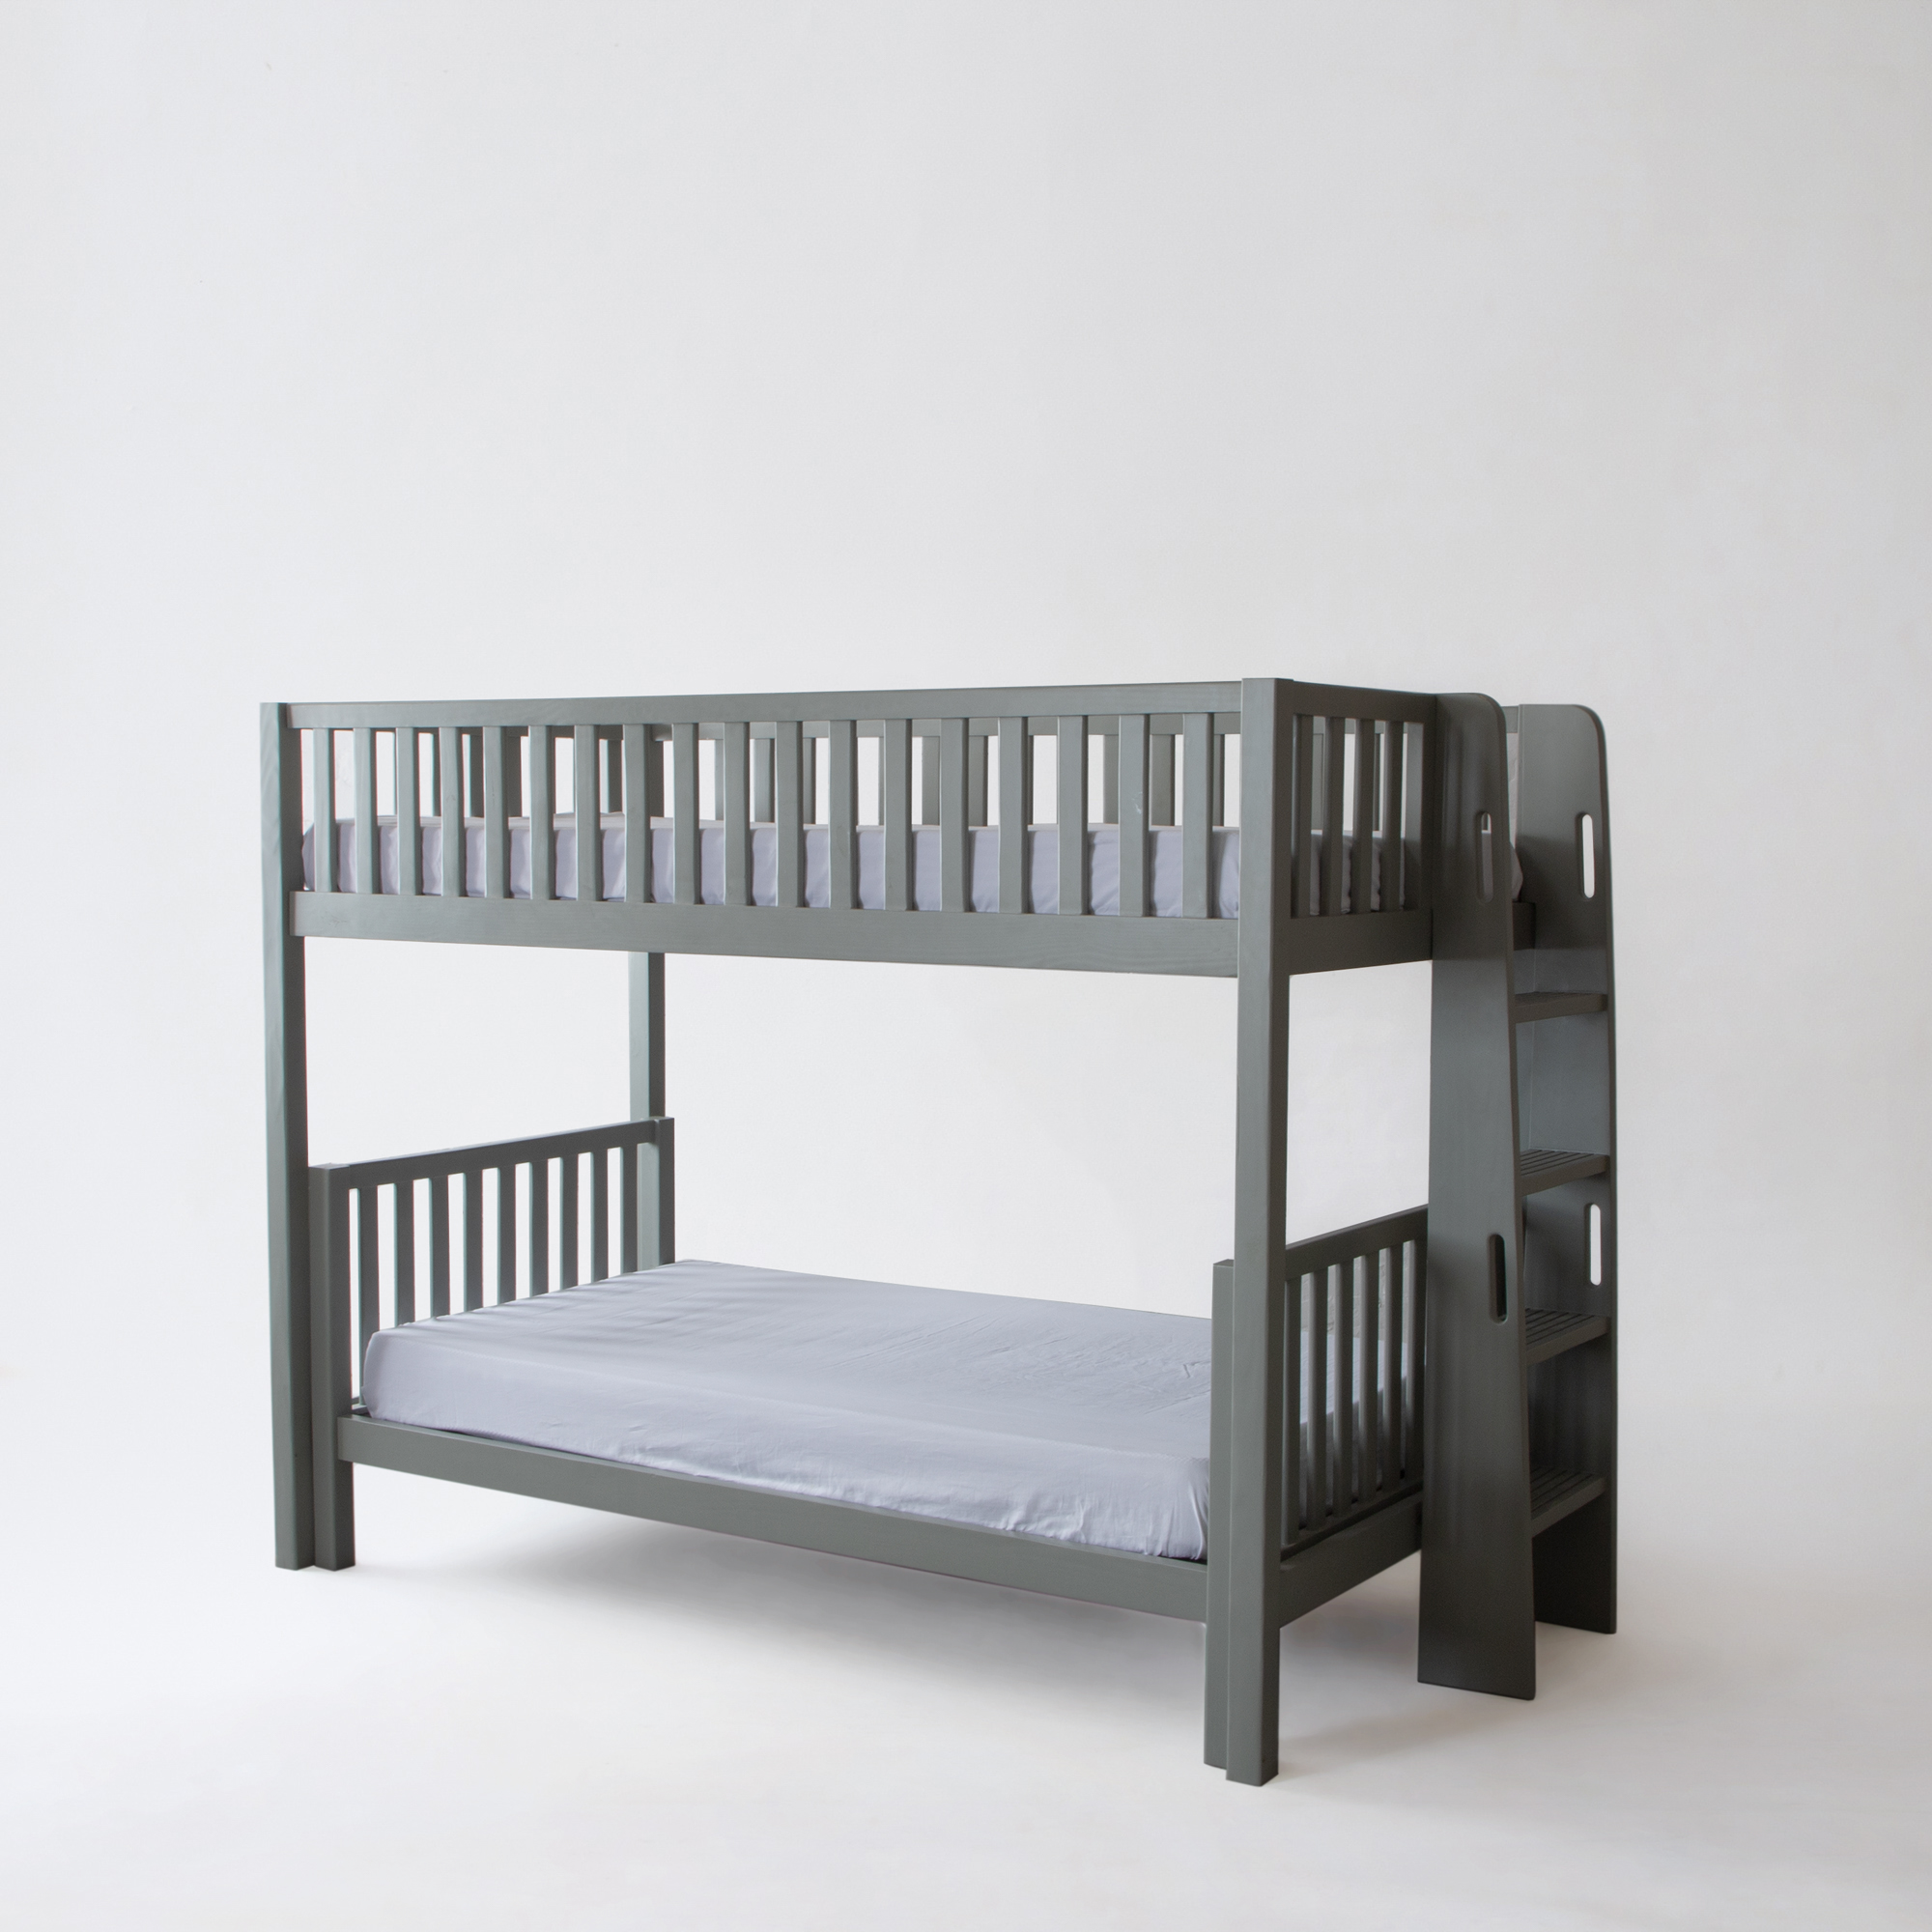 Island Bunk Bed with My Junior Dream Bed and Ladder